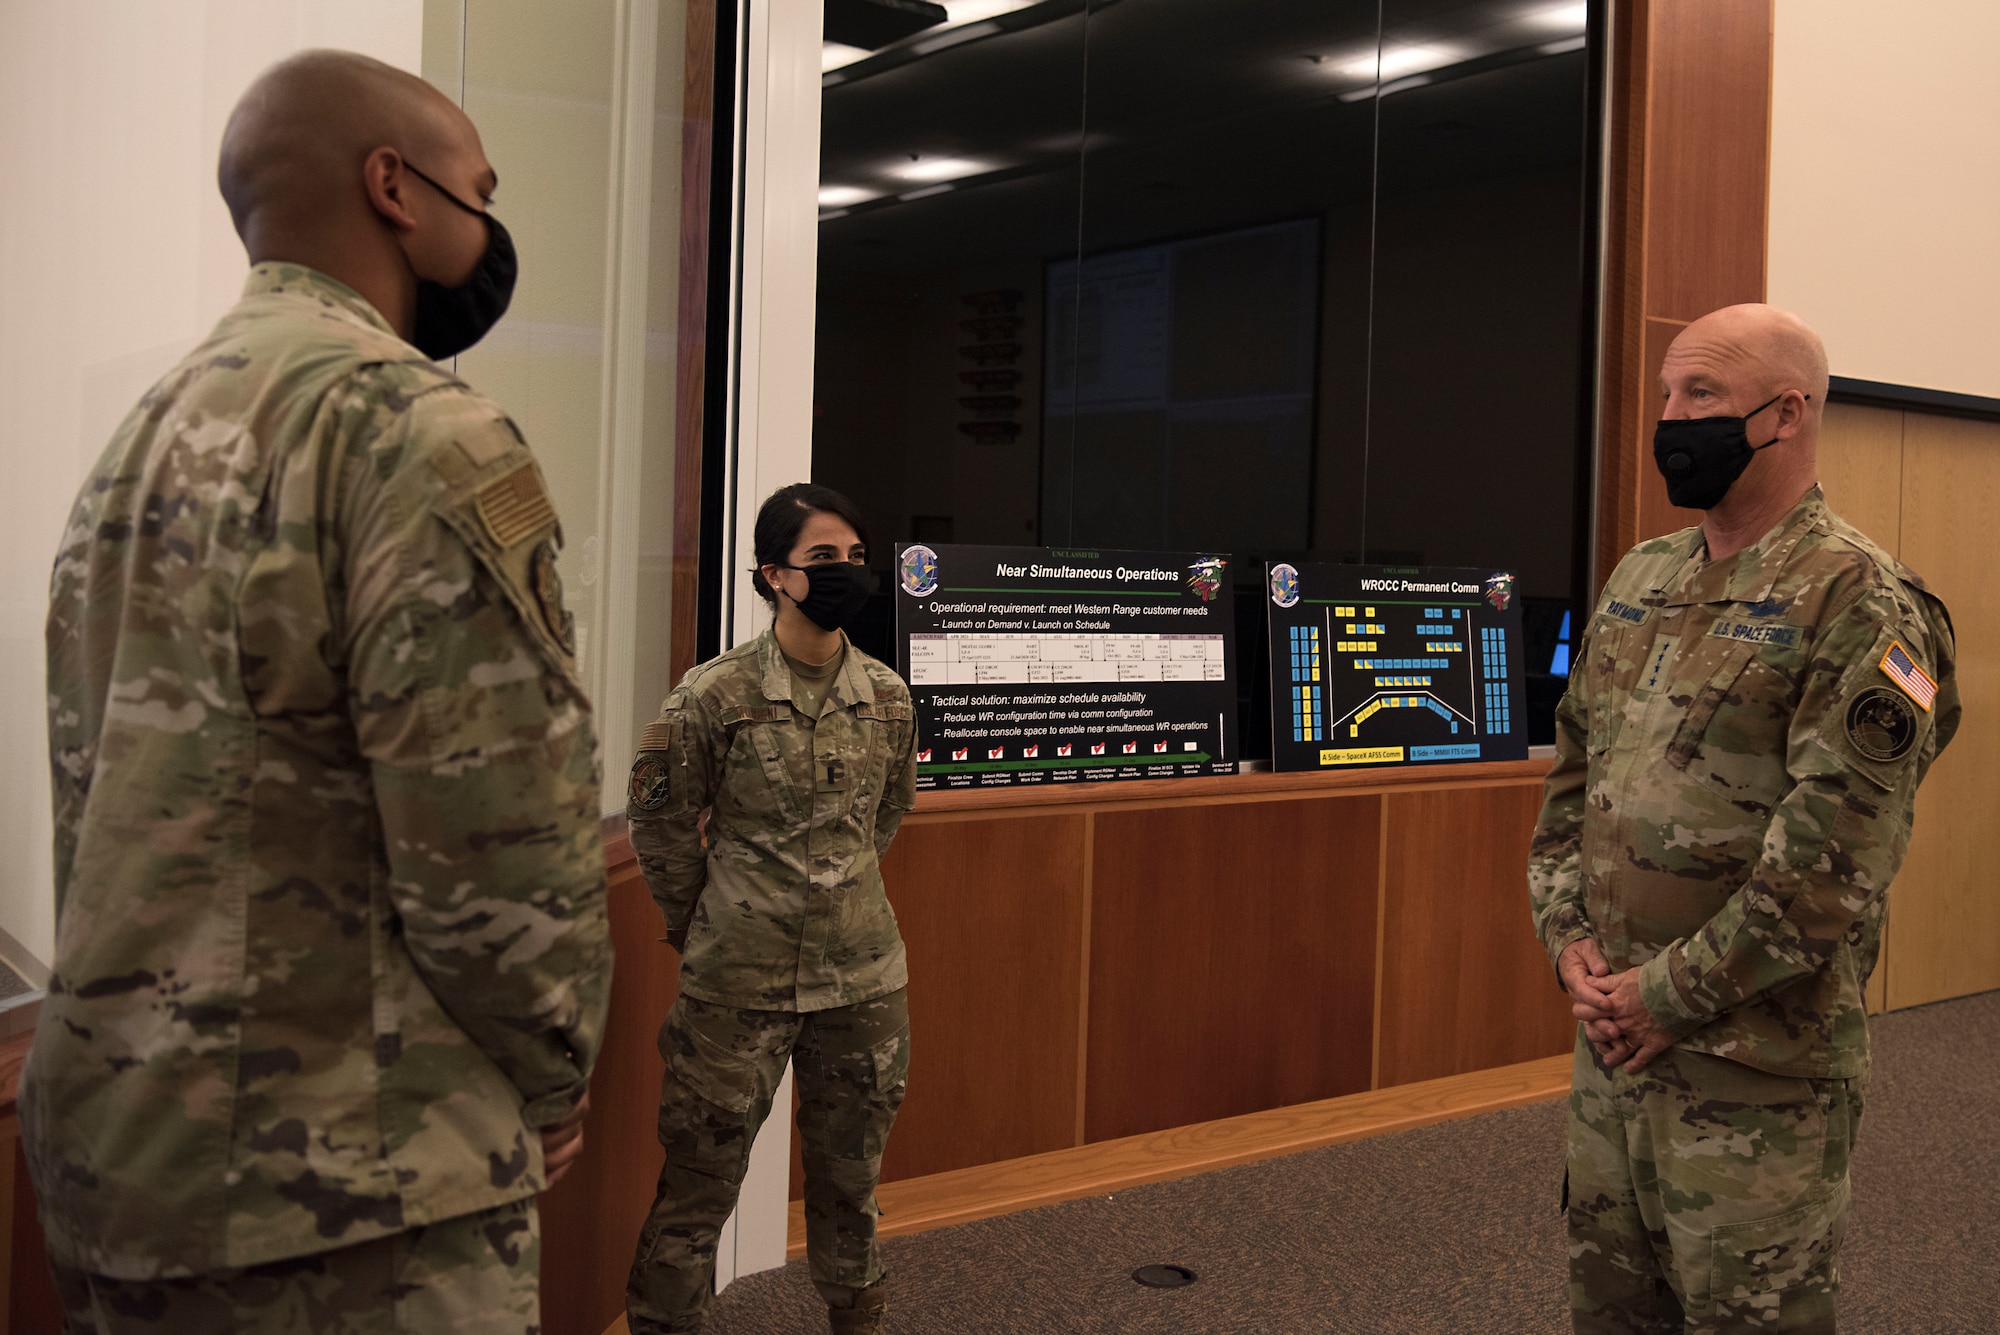 Gen. Jay Raymond, U.S. Space Force Chief of Space Operations and commander of U.S. Space Command, is briefed by 1st Lt. Melanie Mohseni and 1st Lt. Byron Baker, 2nd Range Operation Squadron, while touring the 30th Space Wing’s Western Range Operation Control Center Aug. 3, 2020 at Vandenberg Air Force Base, Calif.